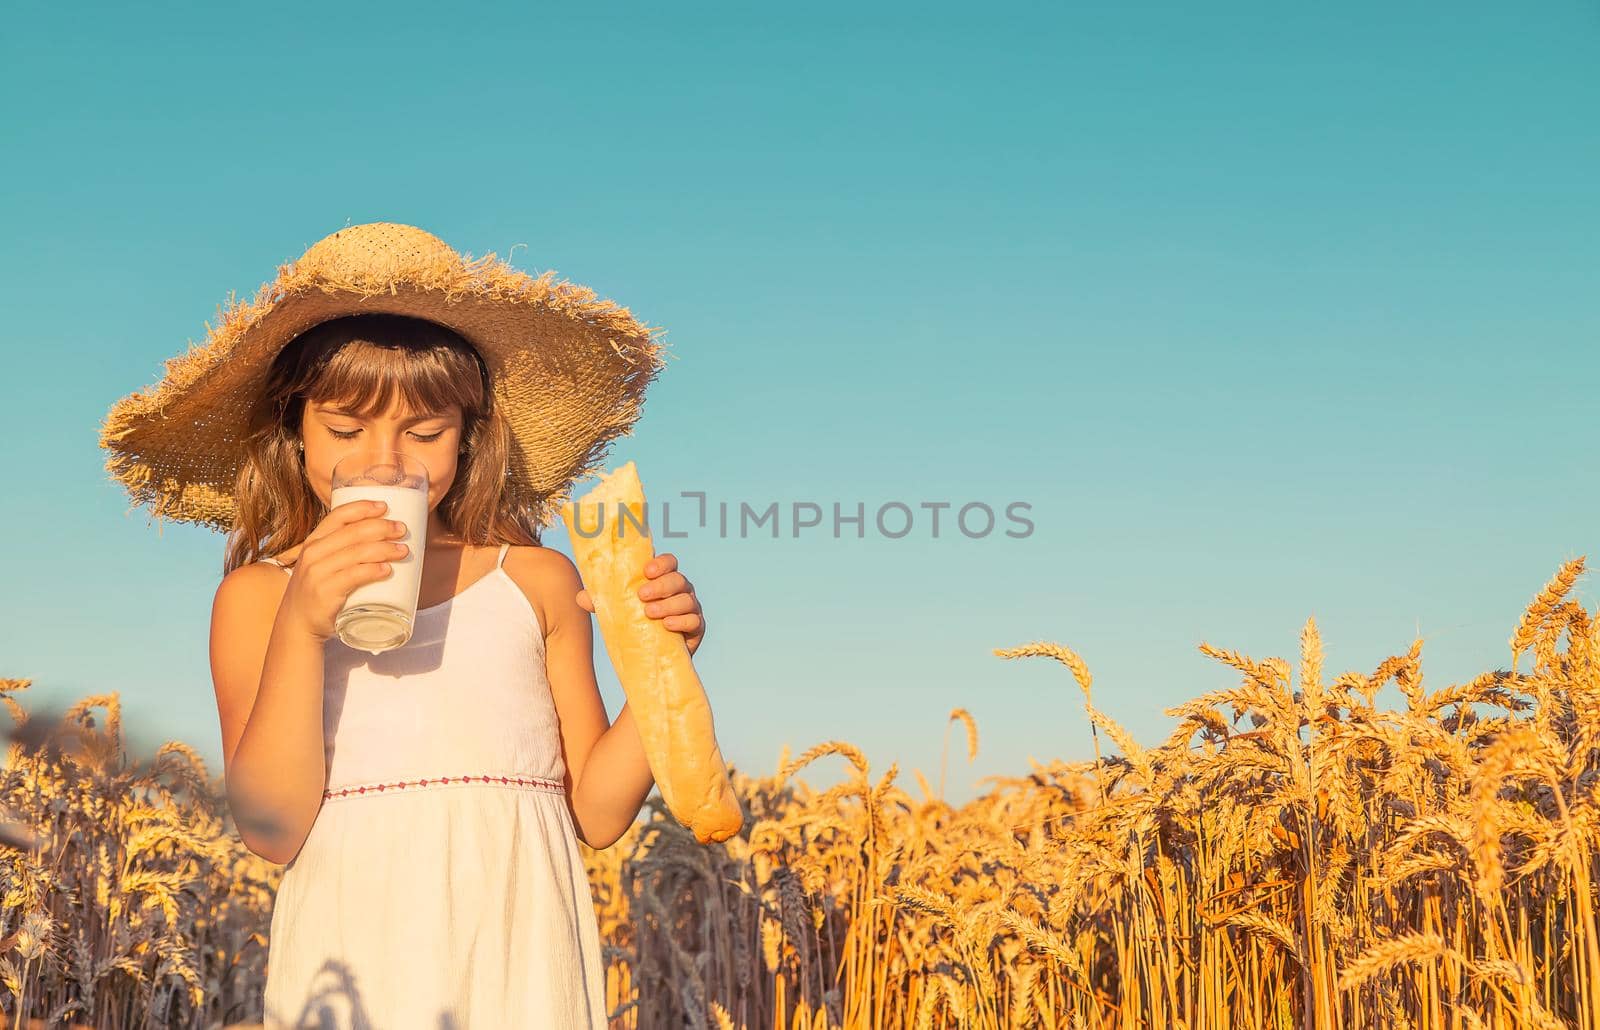 Child with bread and milk in a wheat field. Selective focus. nature.